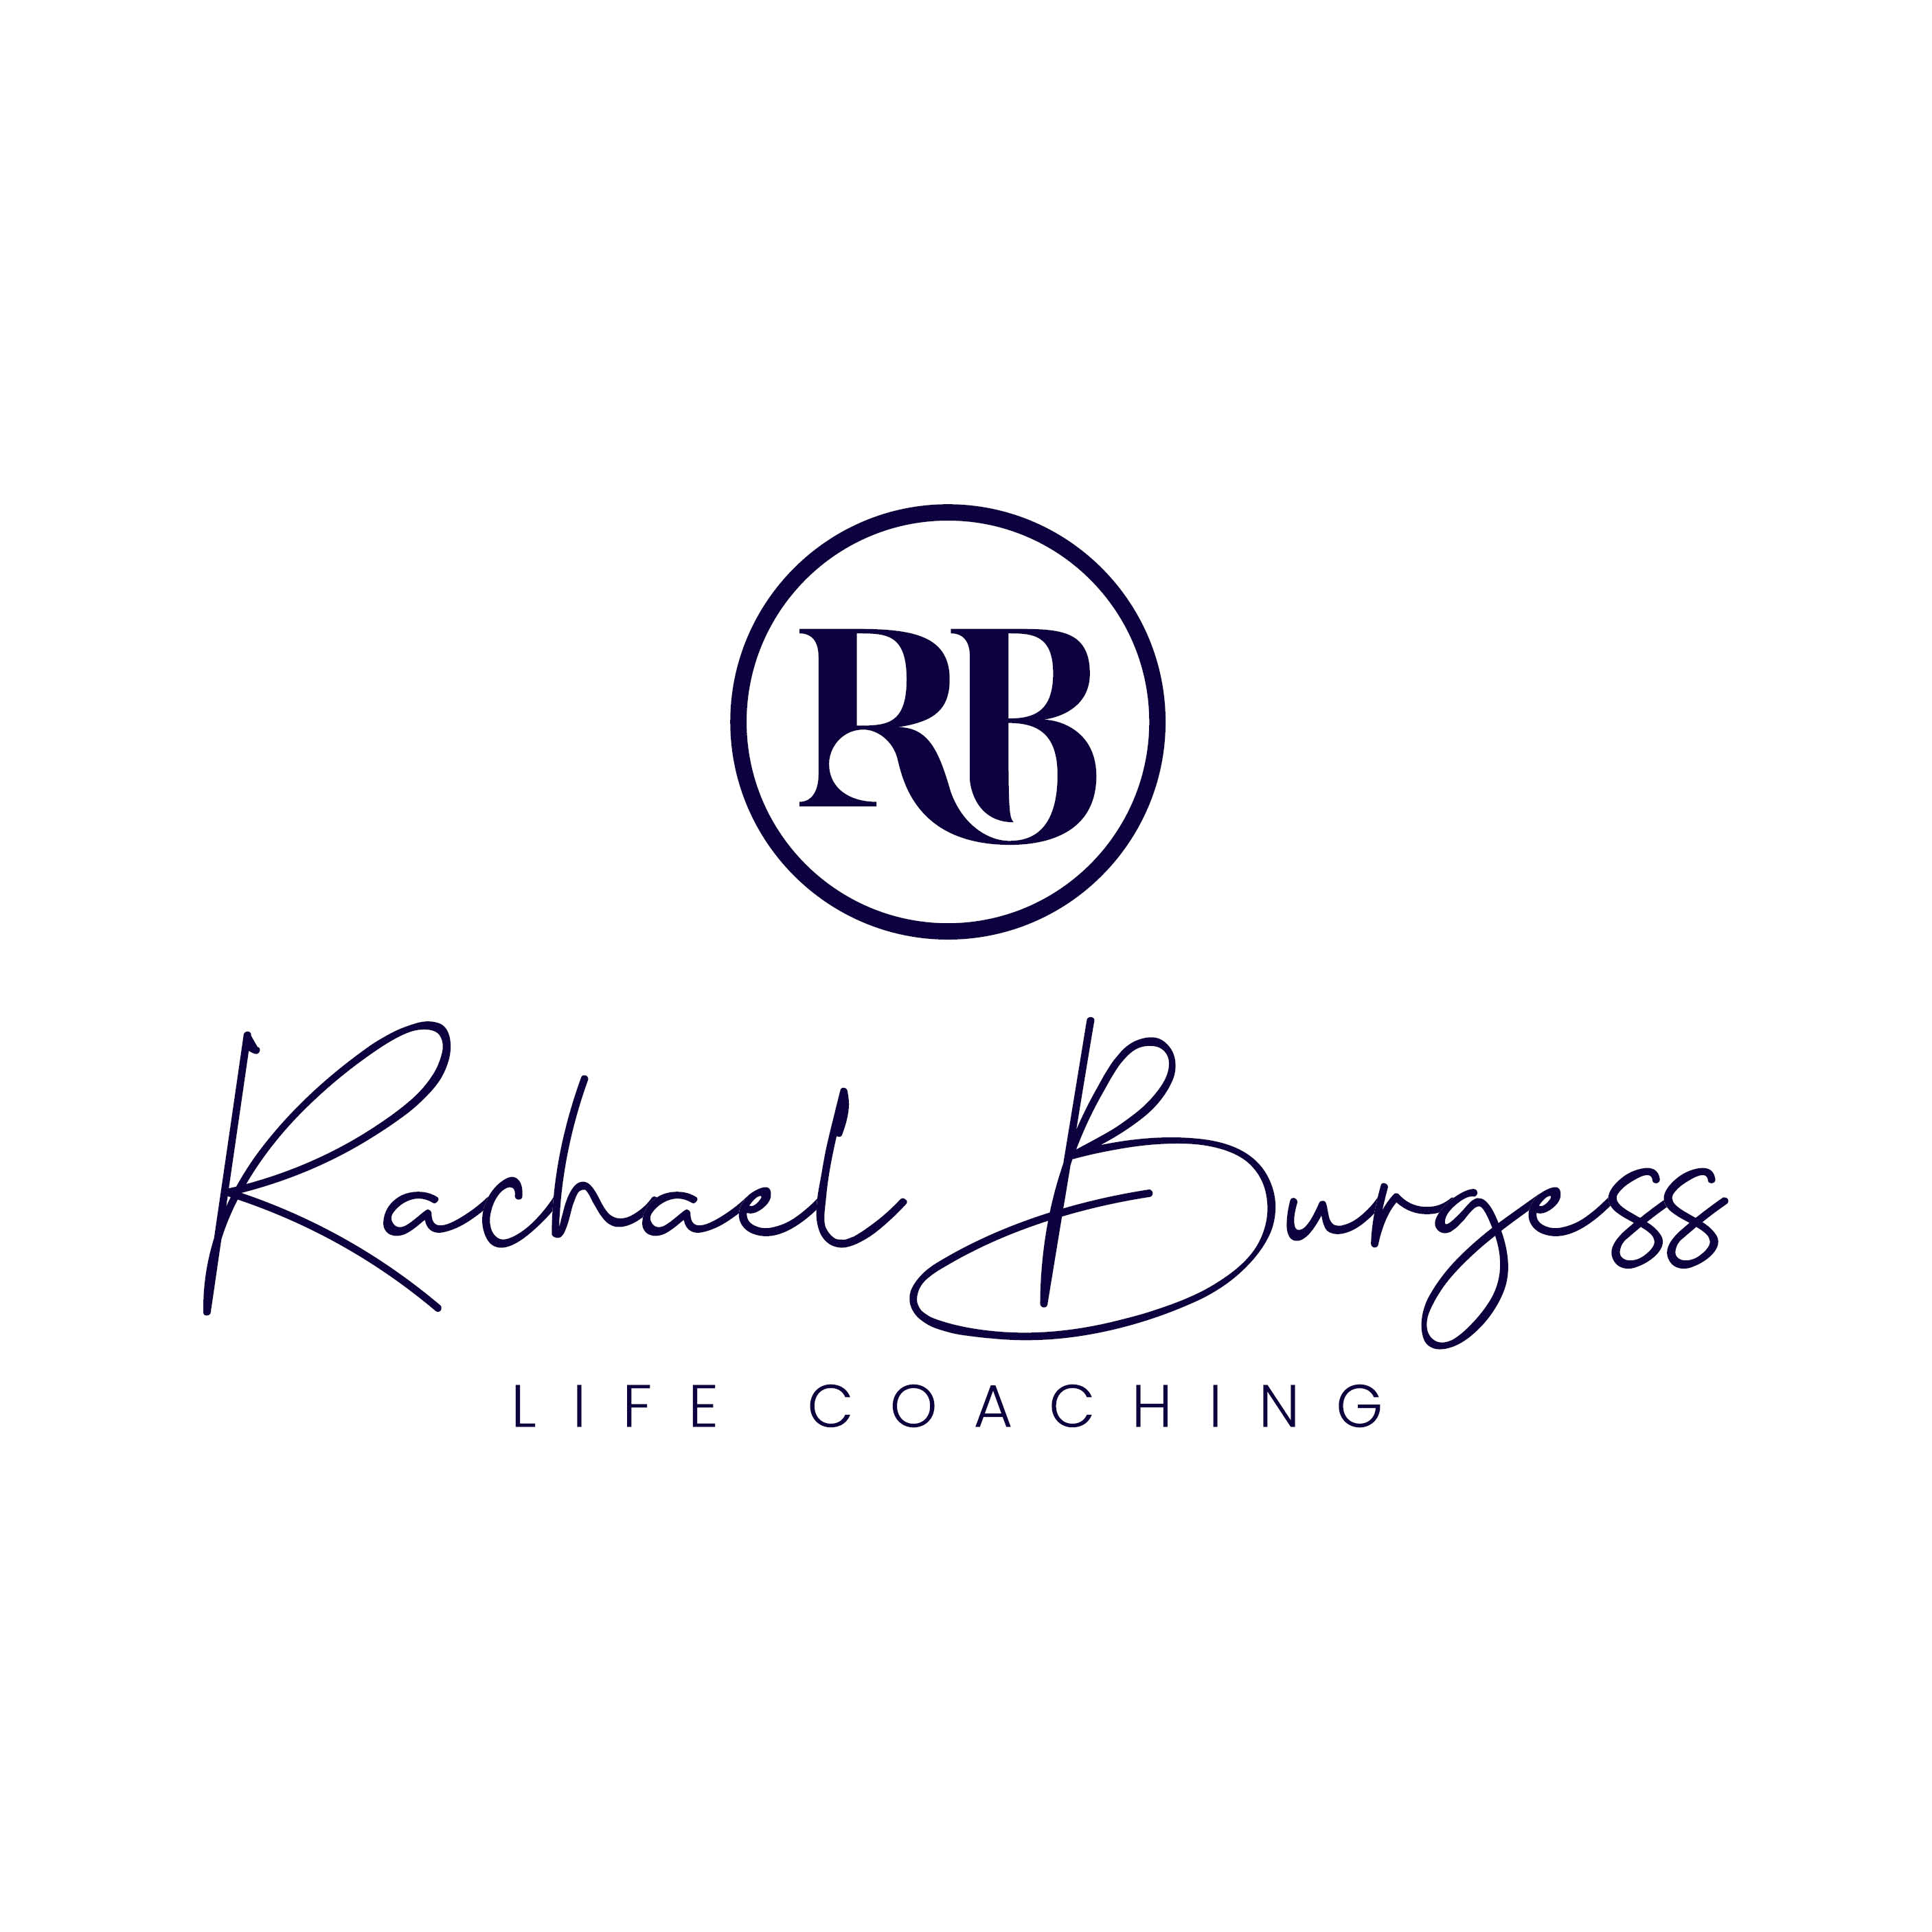 Rachael Burgess Logo logo design by logo designer Duffy Design Co for your inspiration and for the worlds largest logo competition